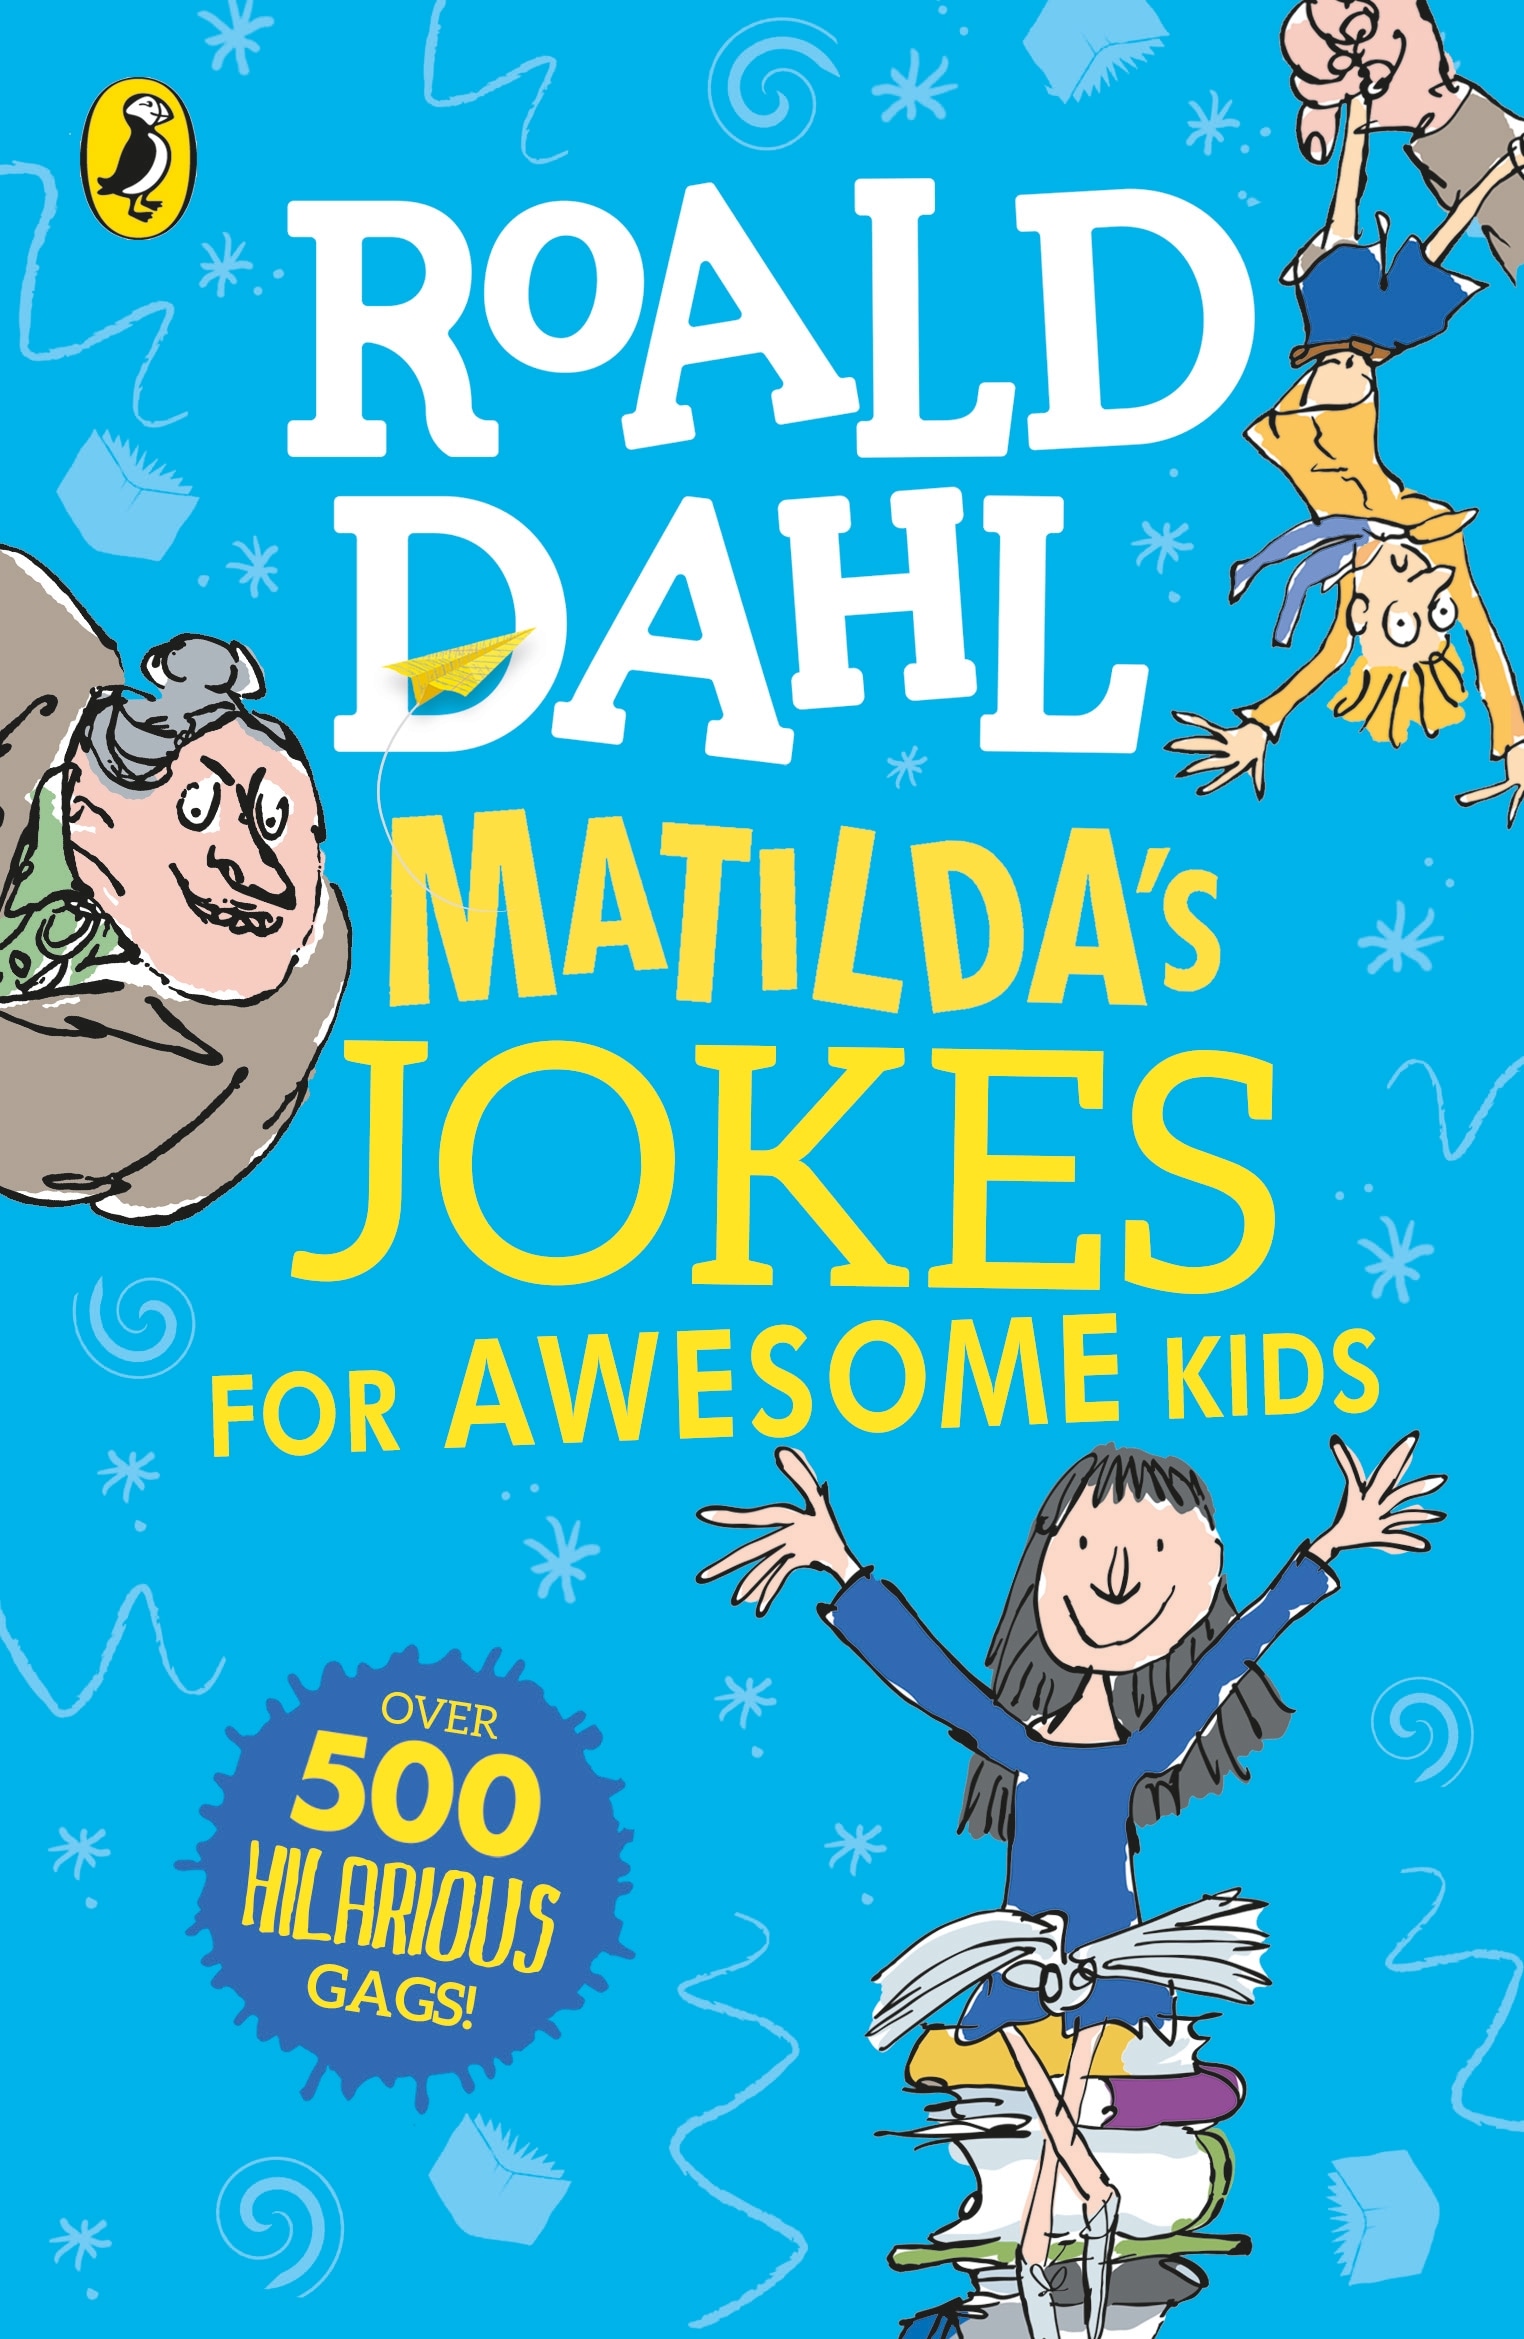 Book “Matilda's Jokes For Awesome Kids” by Roald Dahl — August 22, 2019